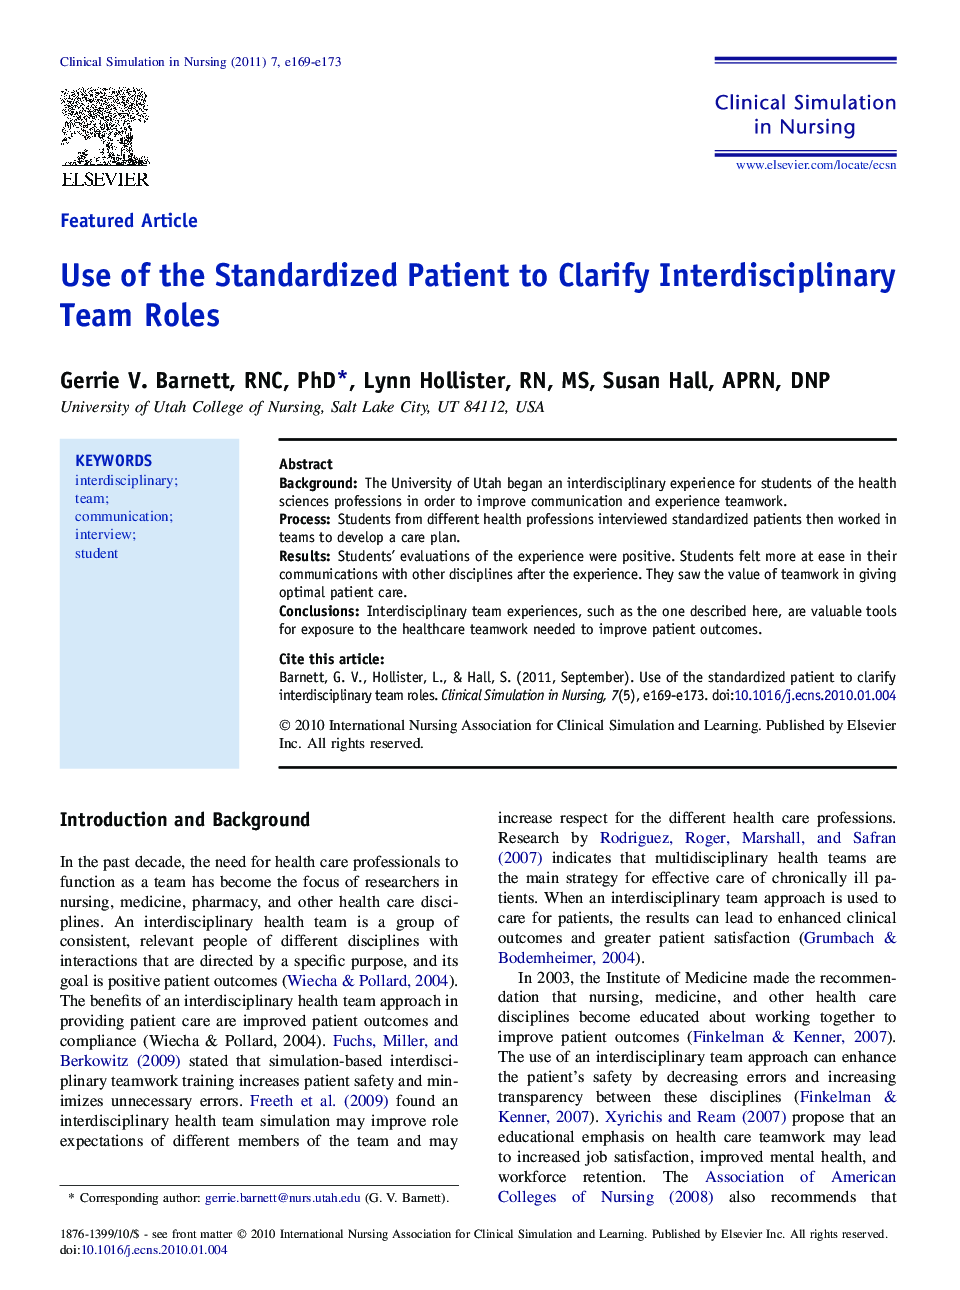 Use of the Standardized Patient to Clarify Interdisciplinary Team Roles